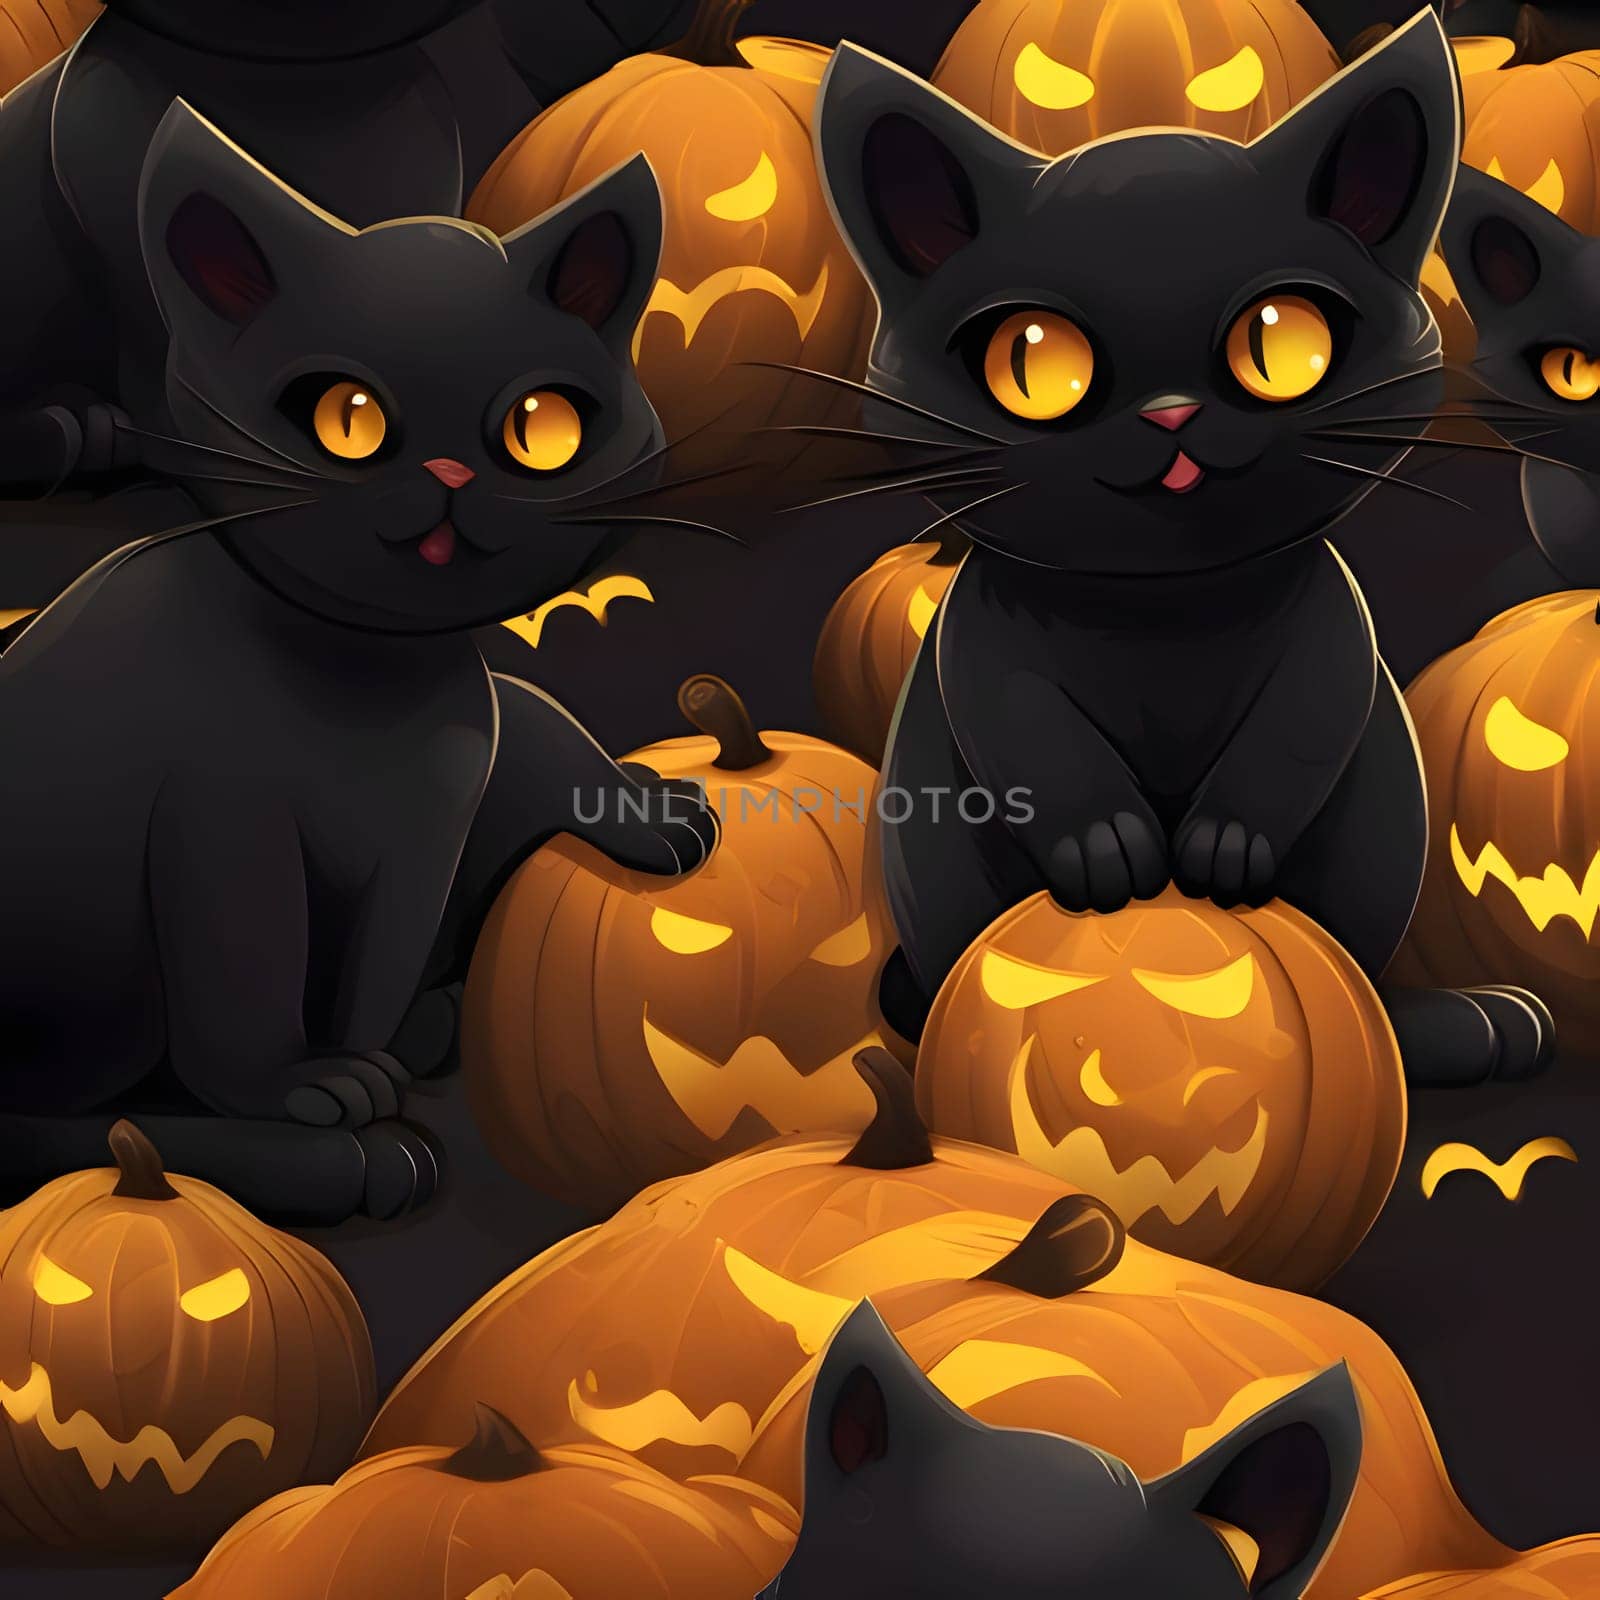 Black cats and glowing jack-o-lantern pumpkins, a Halloween image. by ThemesS